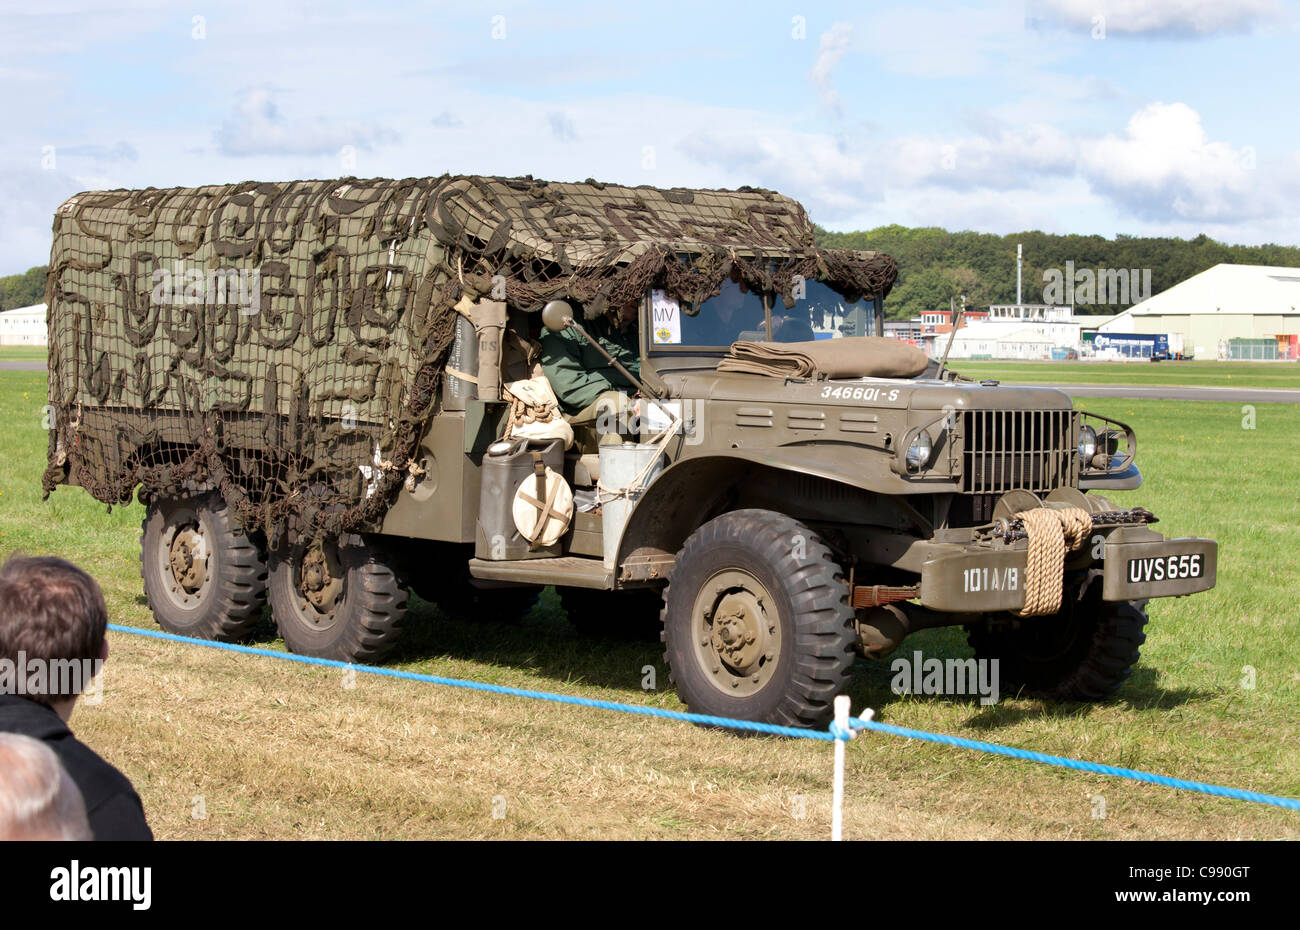 1944 Dodge Weapons Carrier in the military vehicle parade at Dunsfold Wings and Wheels 2011, Surrey, UK Stock Photo